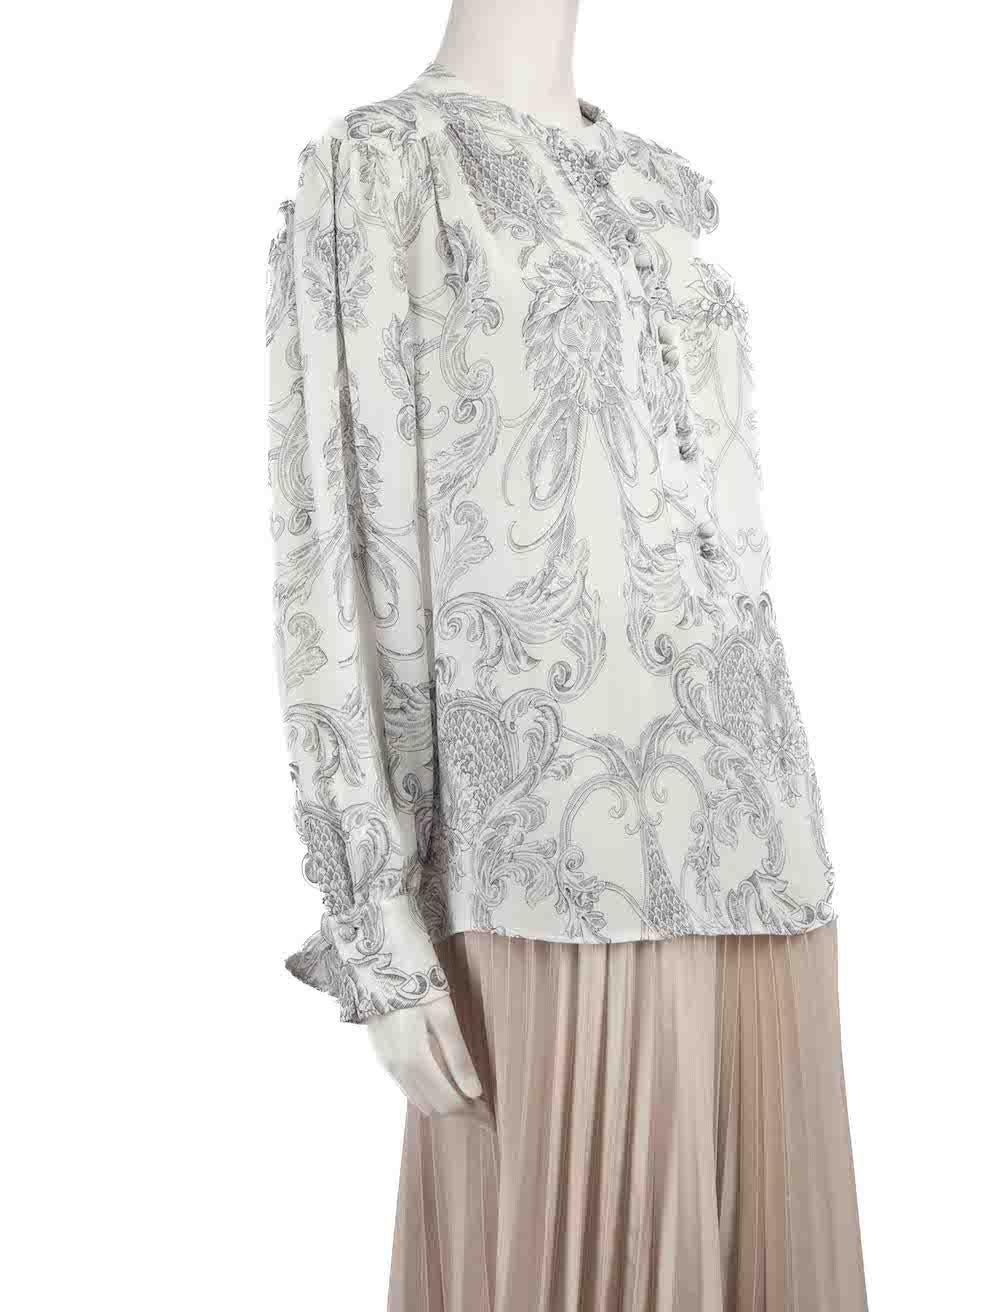 CONDITION is Very good. Minimal wear to blouse is evident. Minimal wear to the front with plucks to the weave on this used See by Chloé designer resale item.
 
 Details
 White
 Polyester
 Blouse
 Abstract floral pattern
 Long sleeves
 Button up